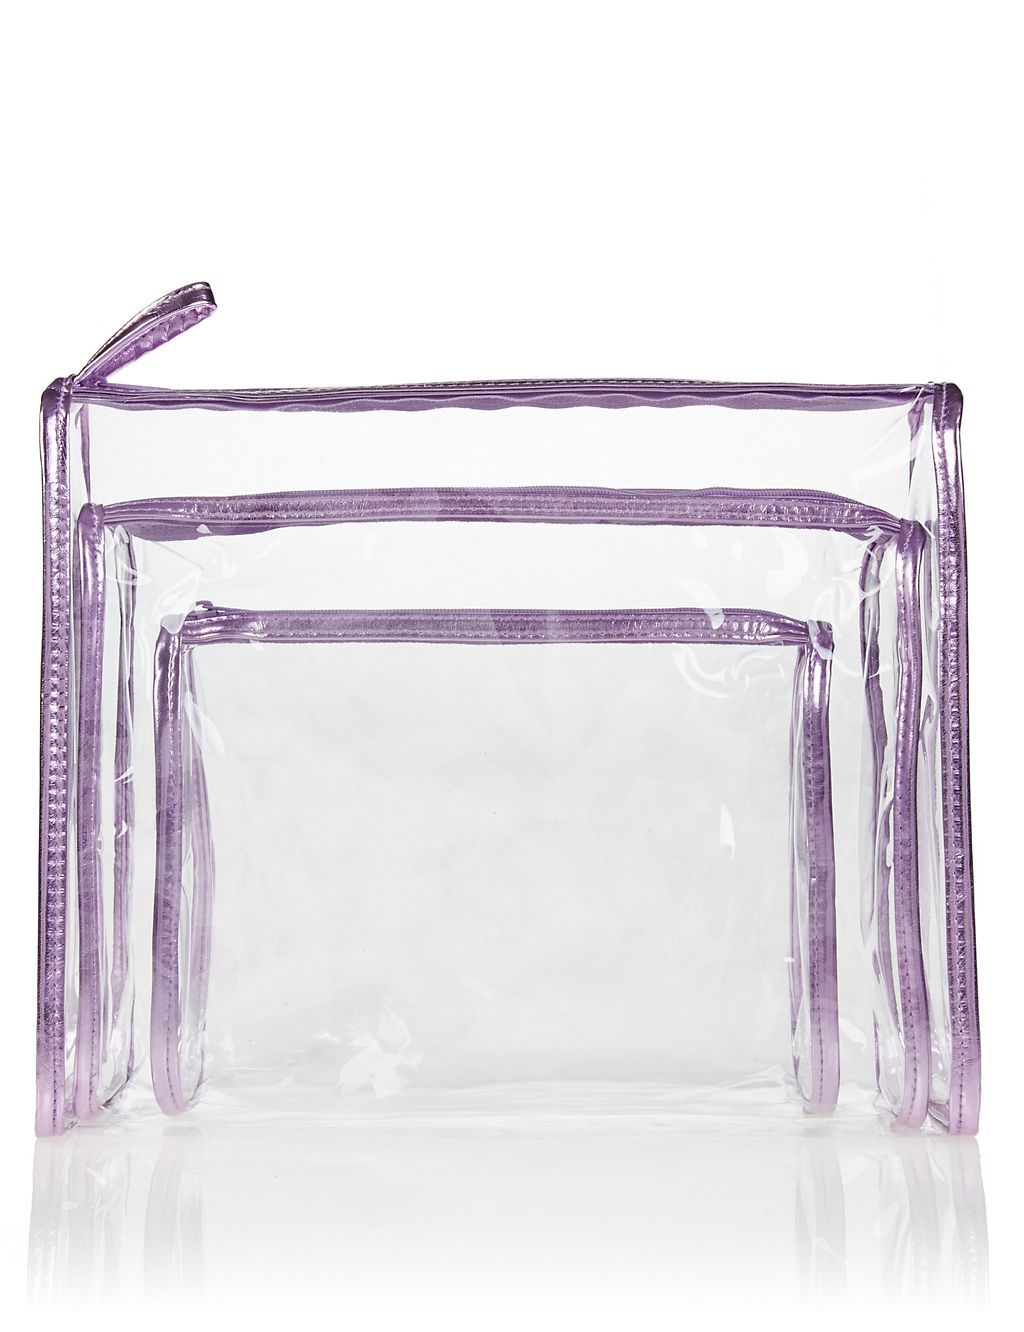 3 Piece Clear Cosmetic Bag Set 1 of 2